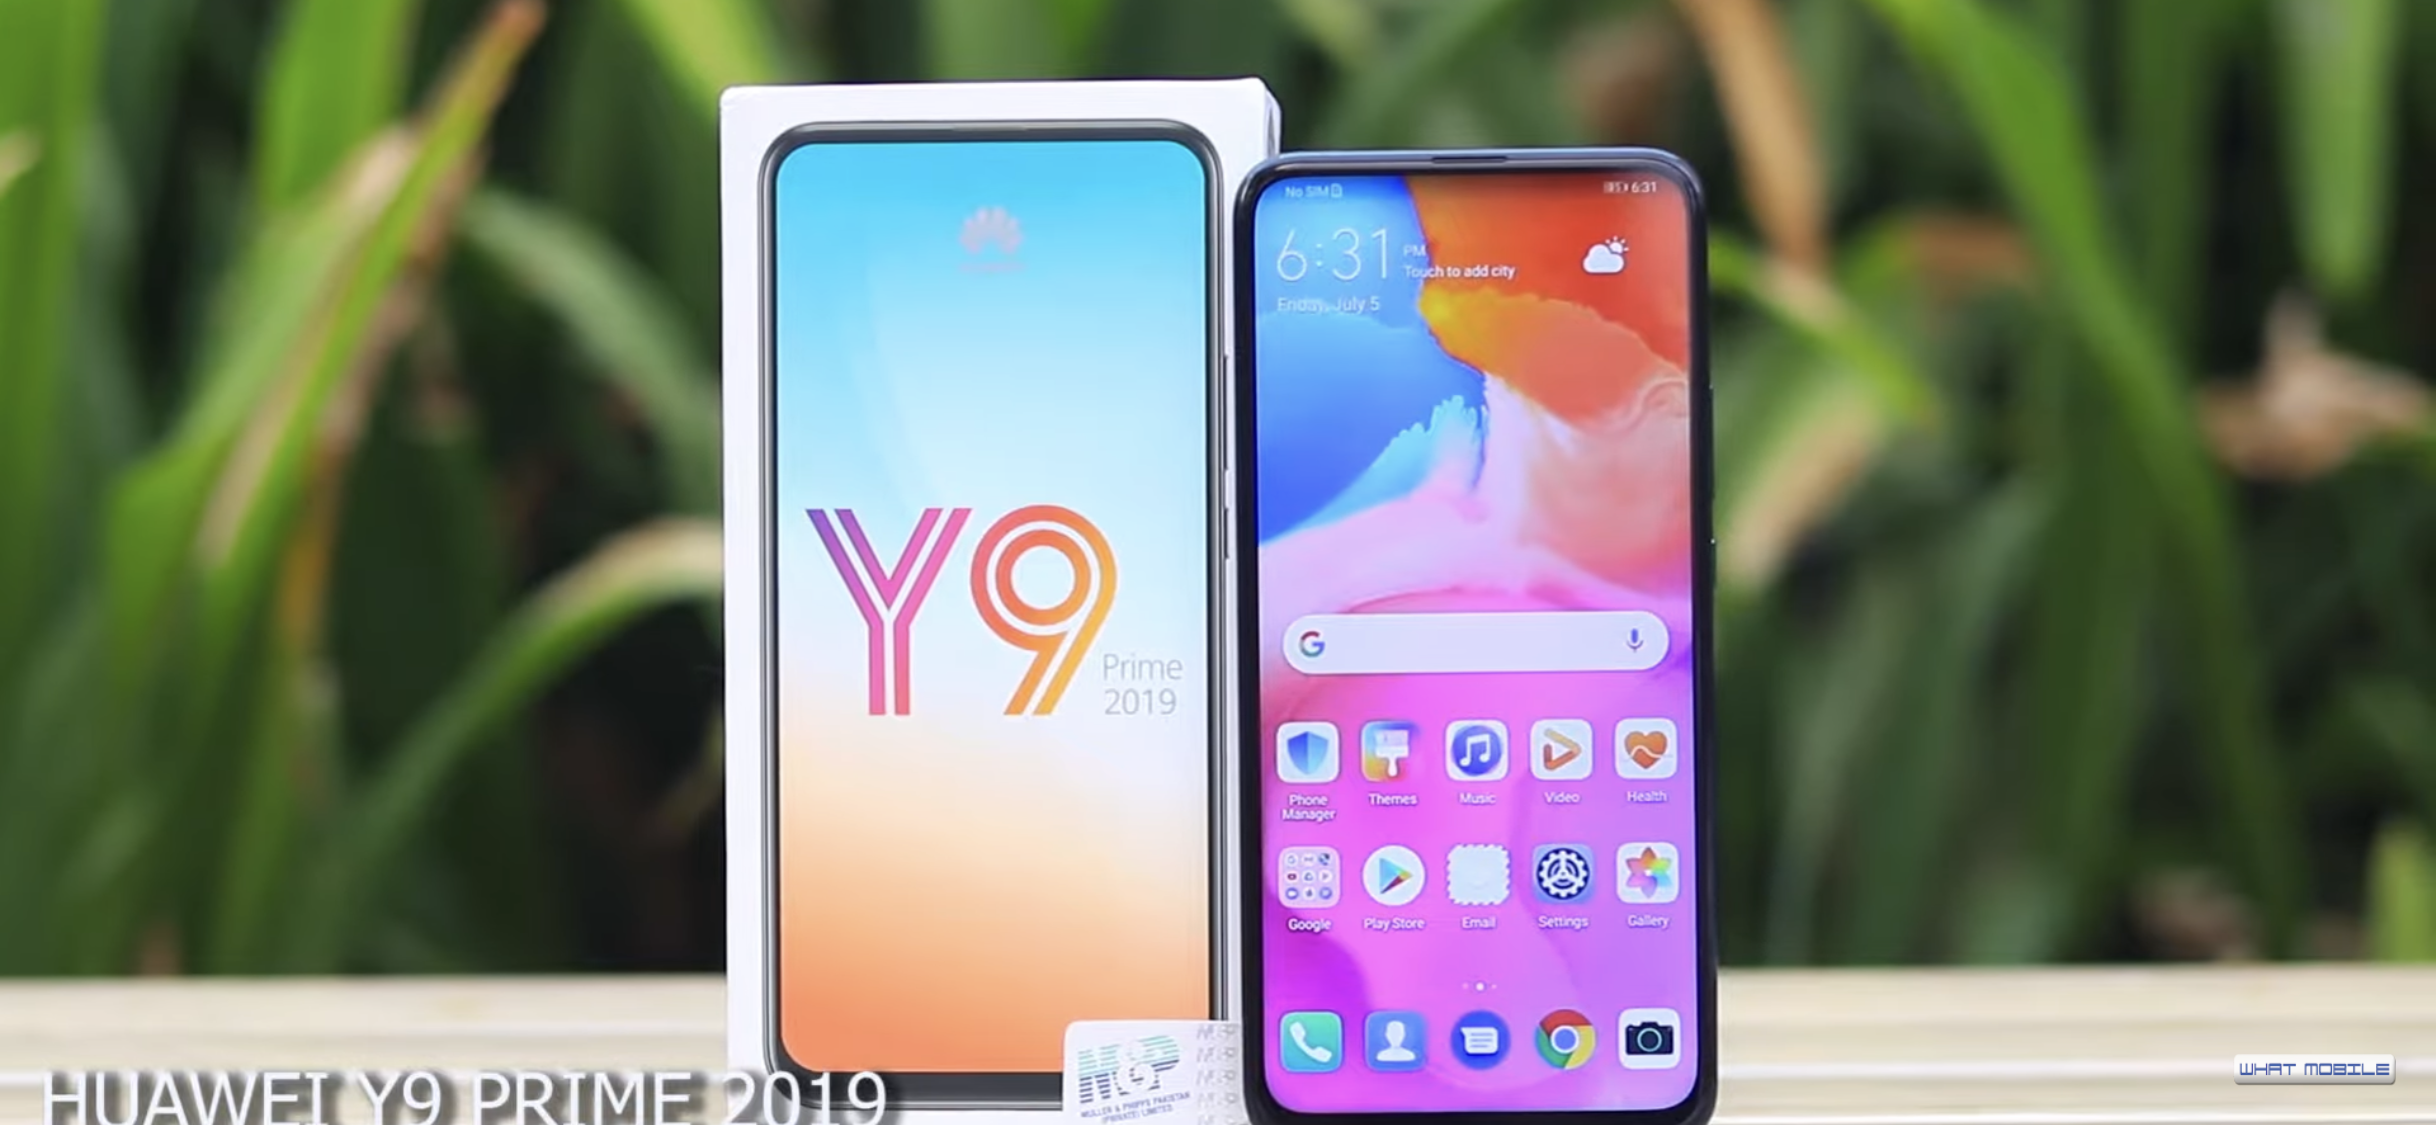 Huawei Y9 Prime (2019) Price in Pakistan and Specifications